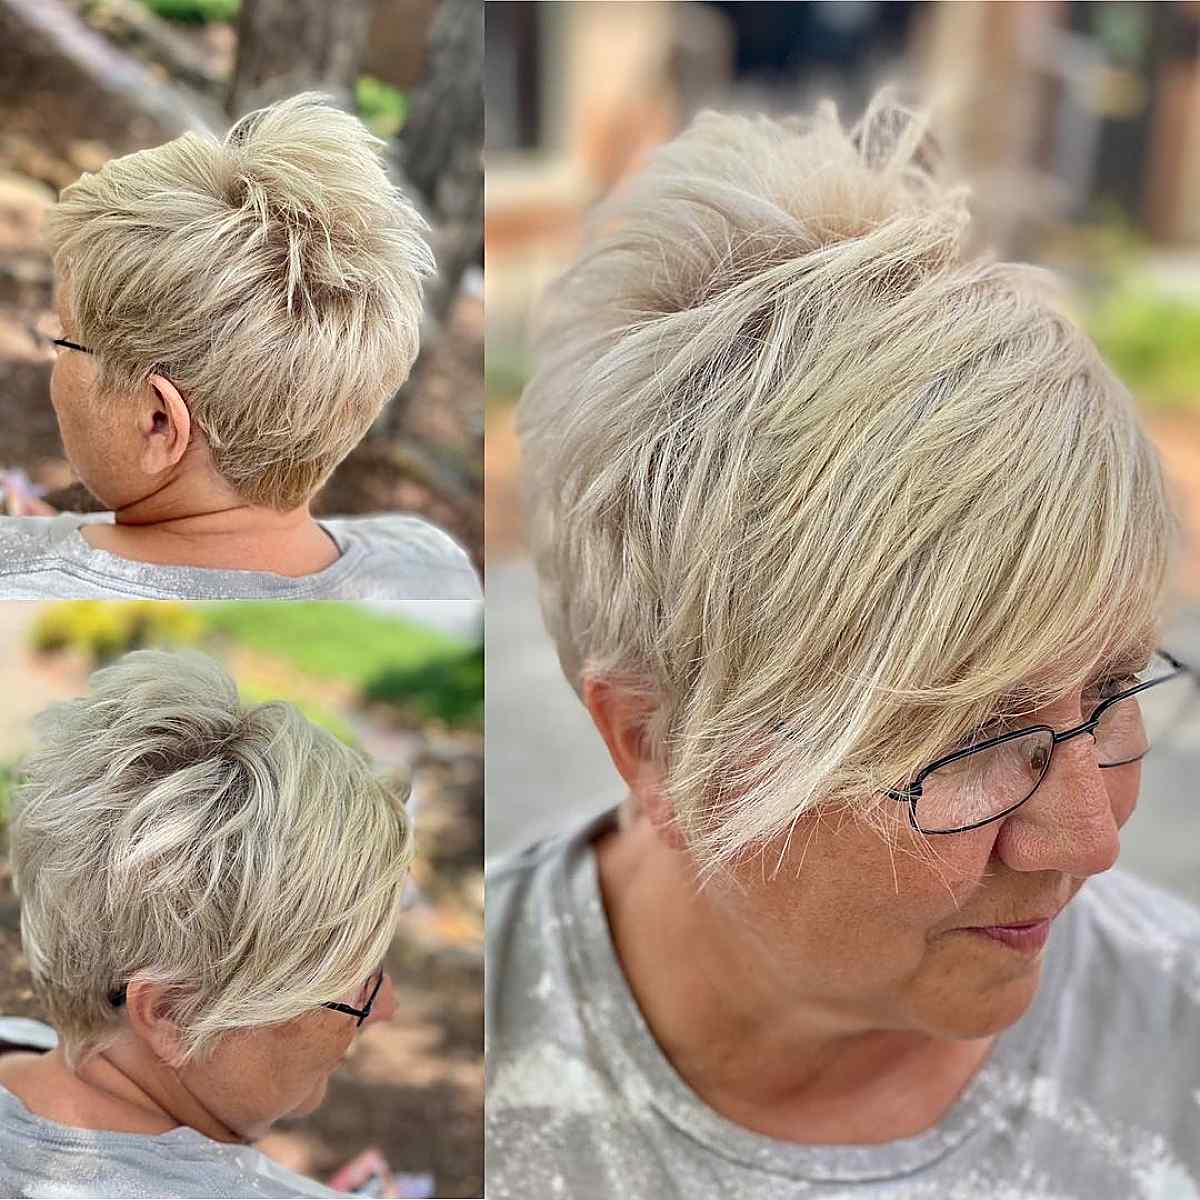 Older woman with an edgy undercut pixie with bangs